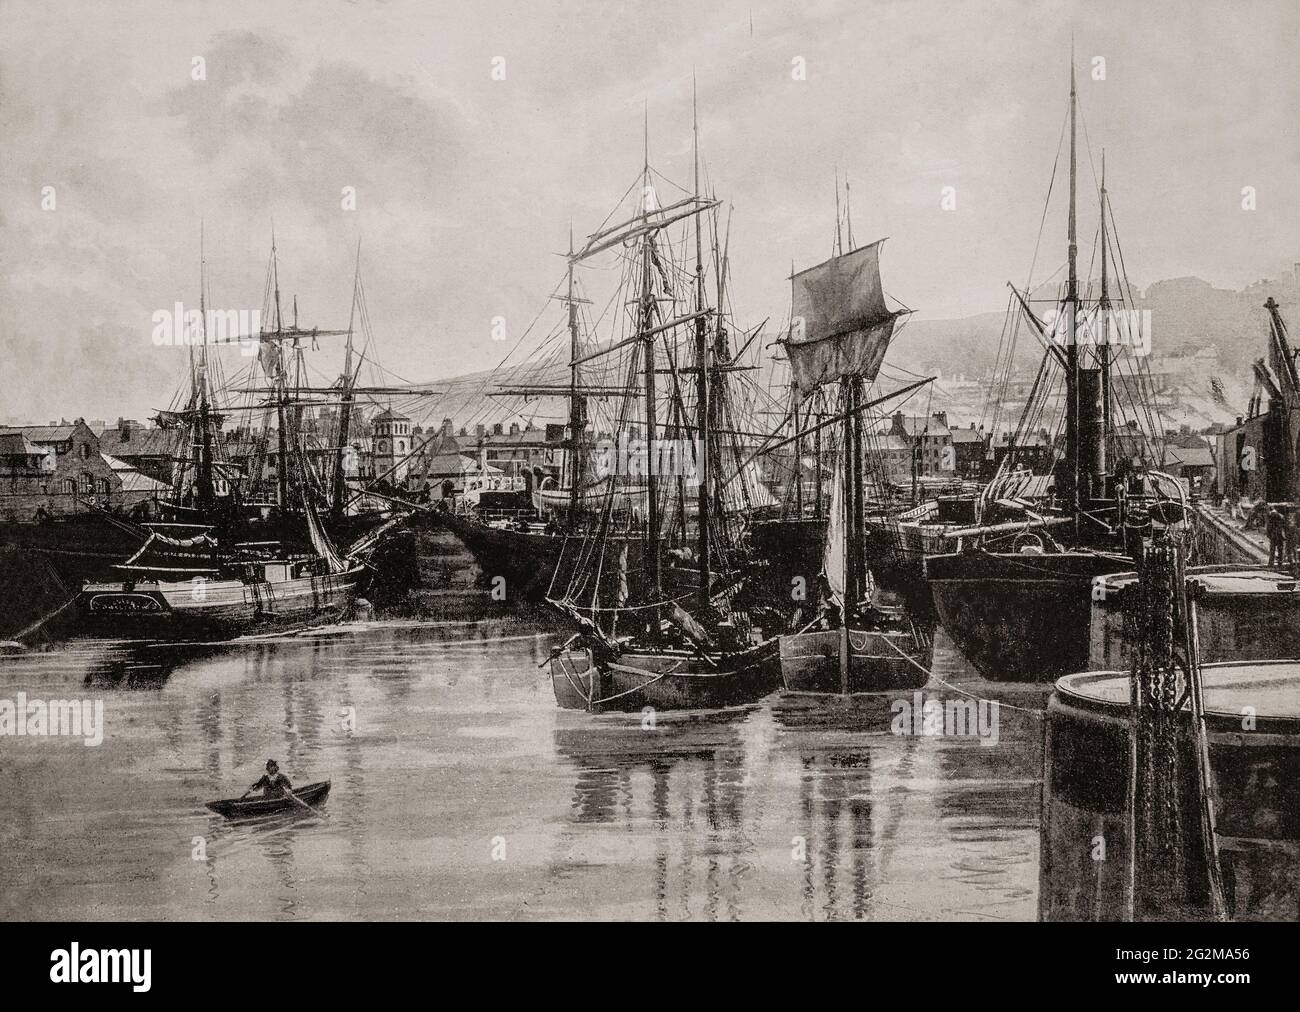 A late 19th century view of massed sailing ships in the harbour at Whitehaven, a town and port on the west coast of Cumbria, historically in Cumberland, England. With a growing export of coal through the harbour from the 17th century onwards it also became a major port for trading with the American colonies, and was, after London, the second busiest port of England by tonnage from 1750 to 1772. However, the port's trade waned rapidly when ports with much larger shipping capacity, such as Bristol and Liverpool, began to take over its main trade. Stock Photo